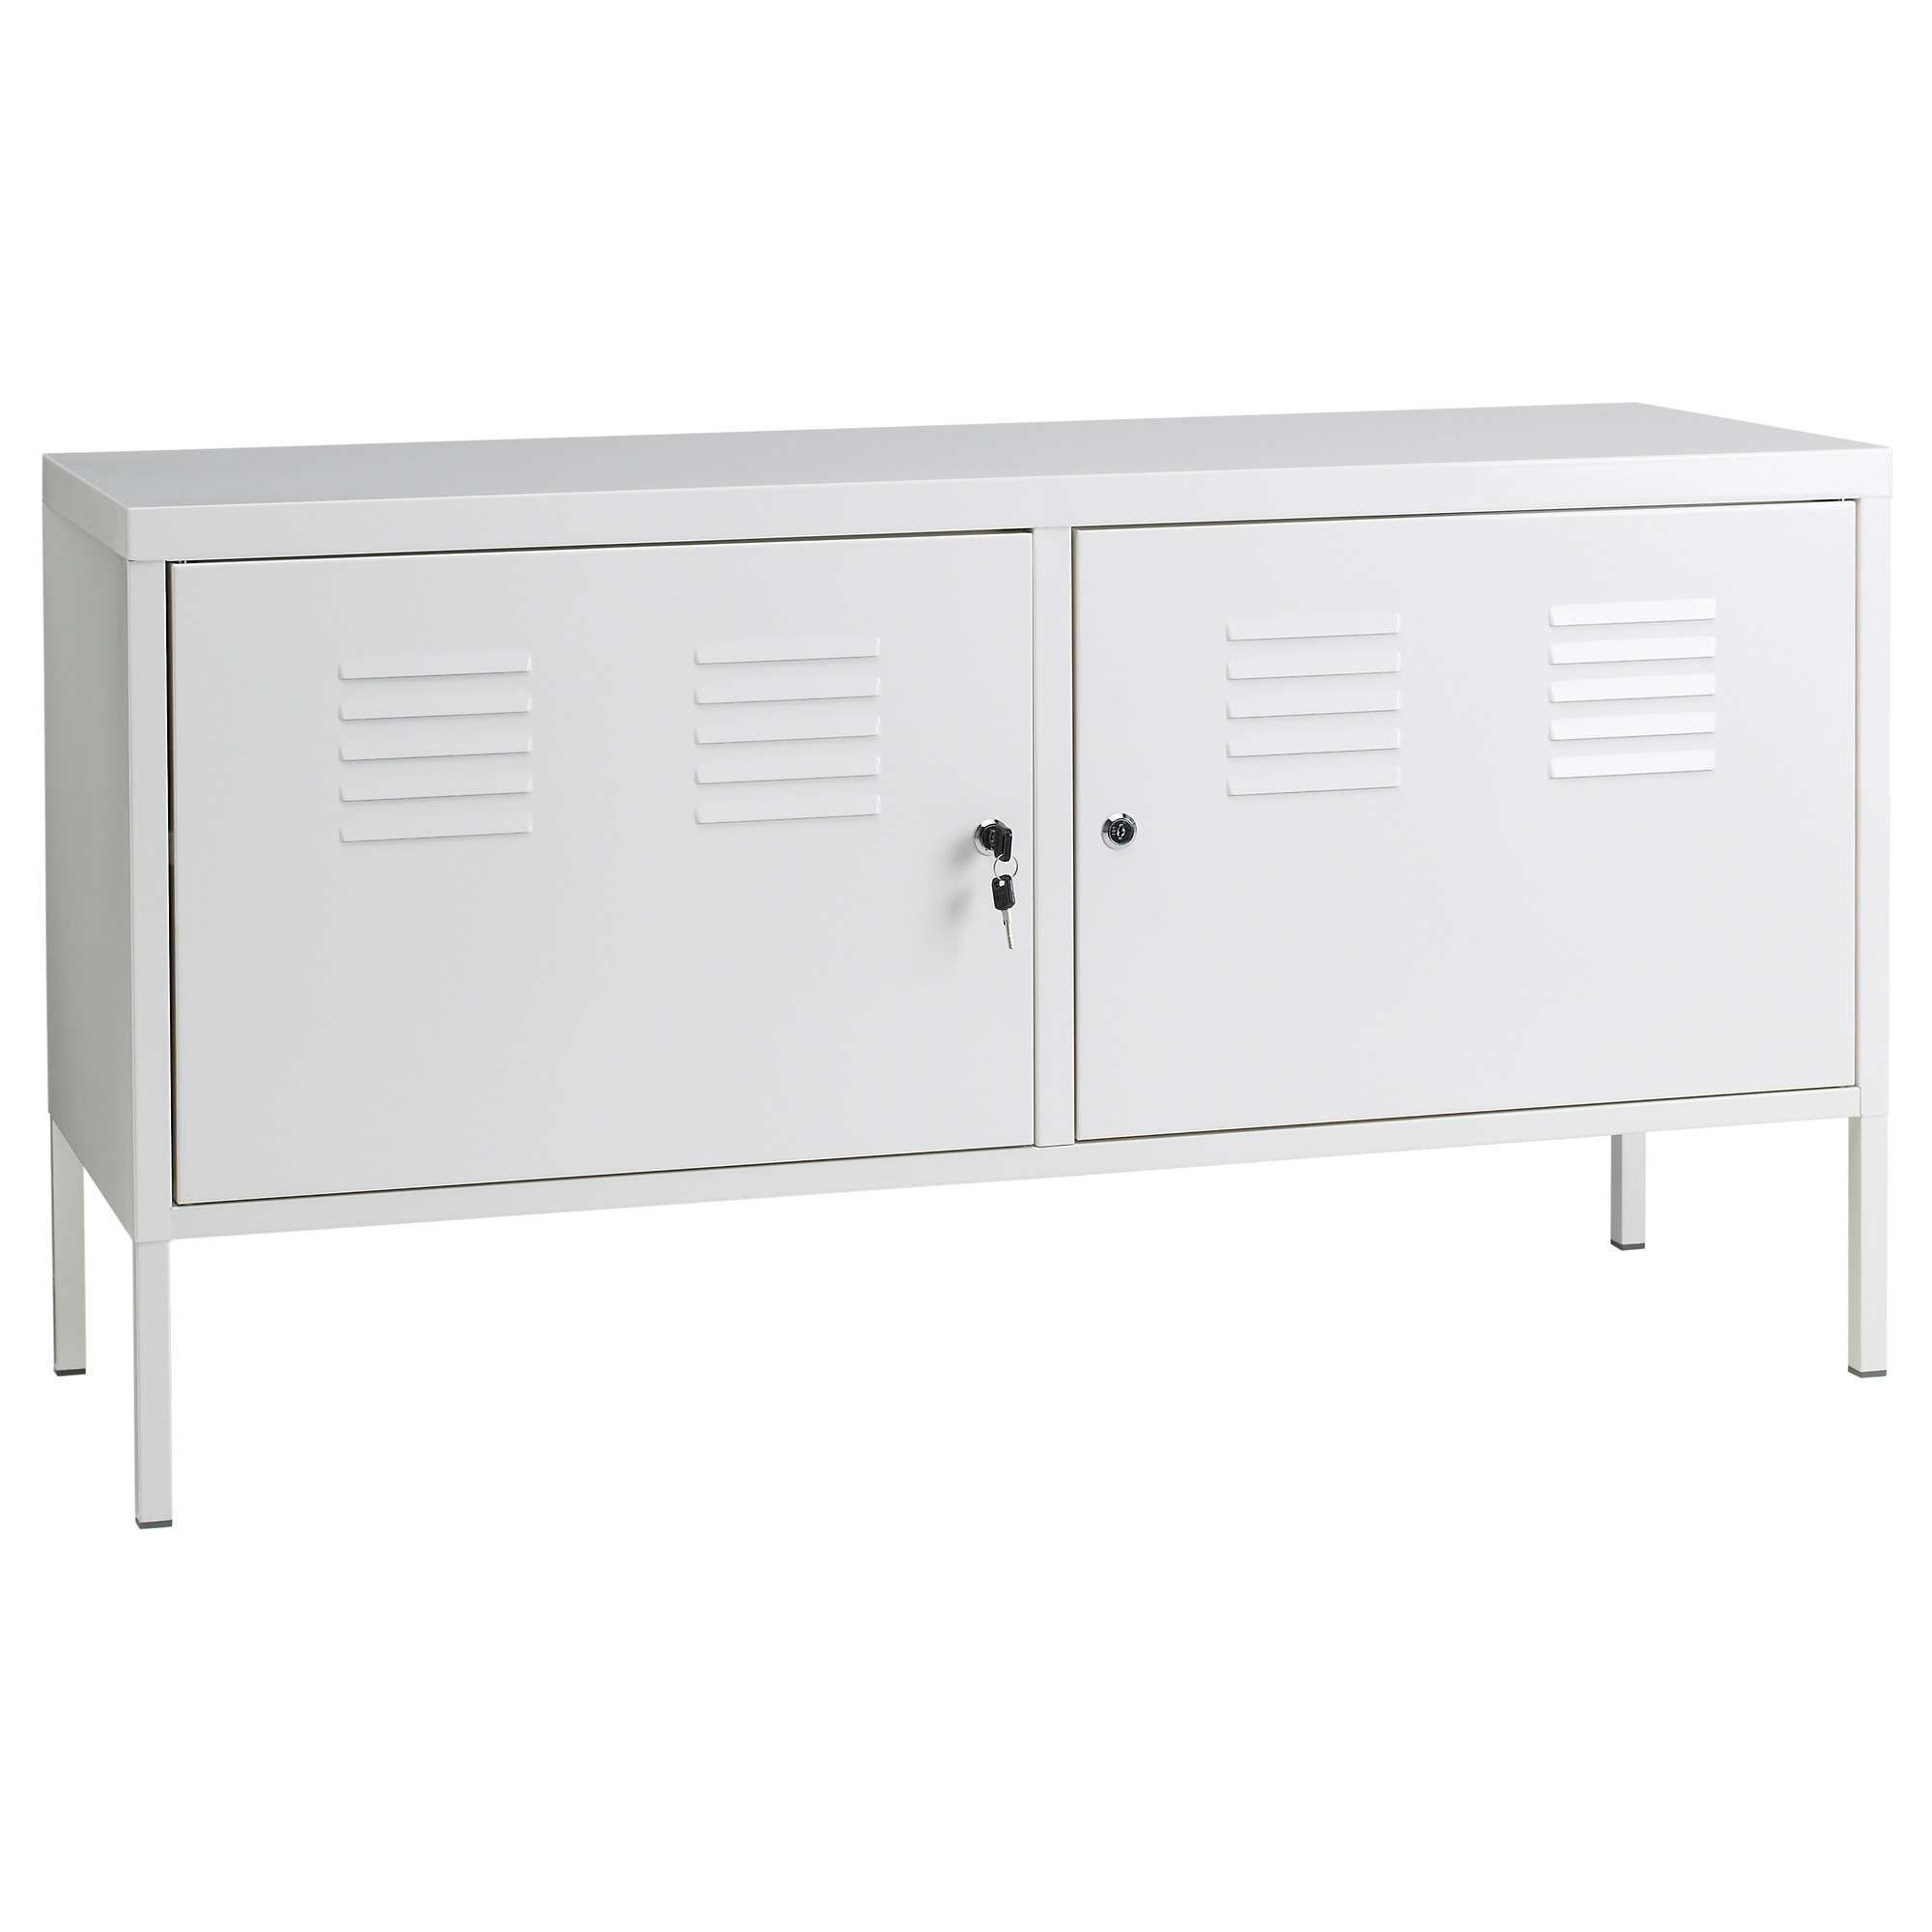 Ikea Ps Cabinet White 119x63 Cm – Ikea With Sideboards Cabinets (View 9 of 20)